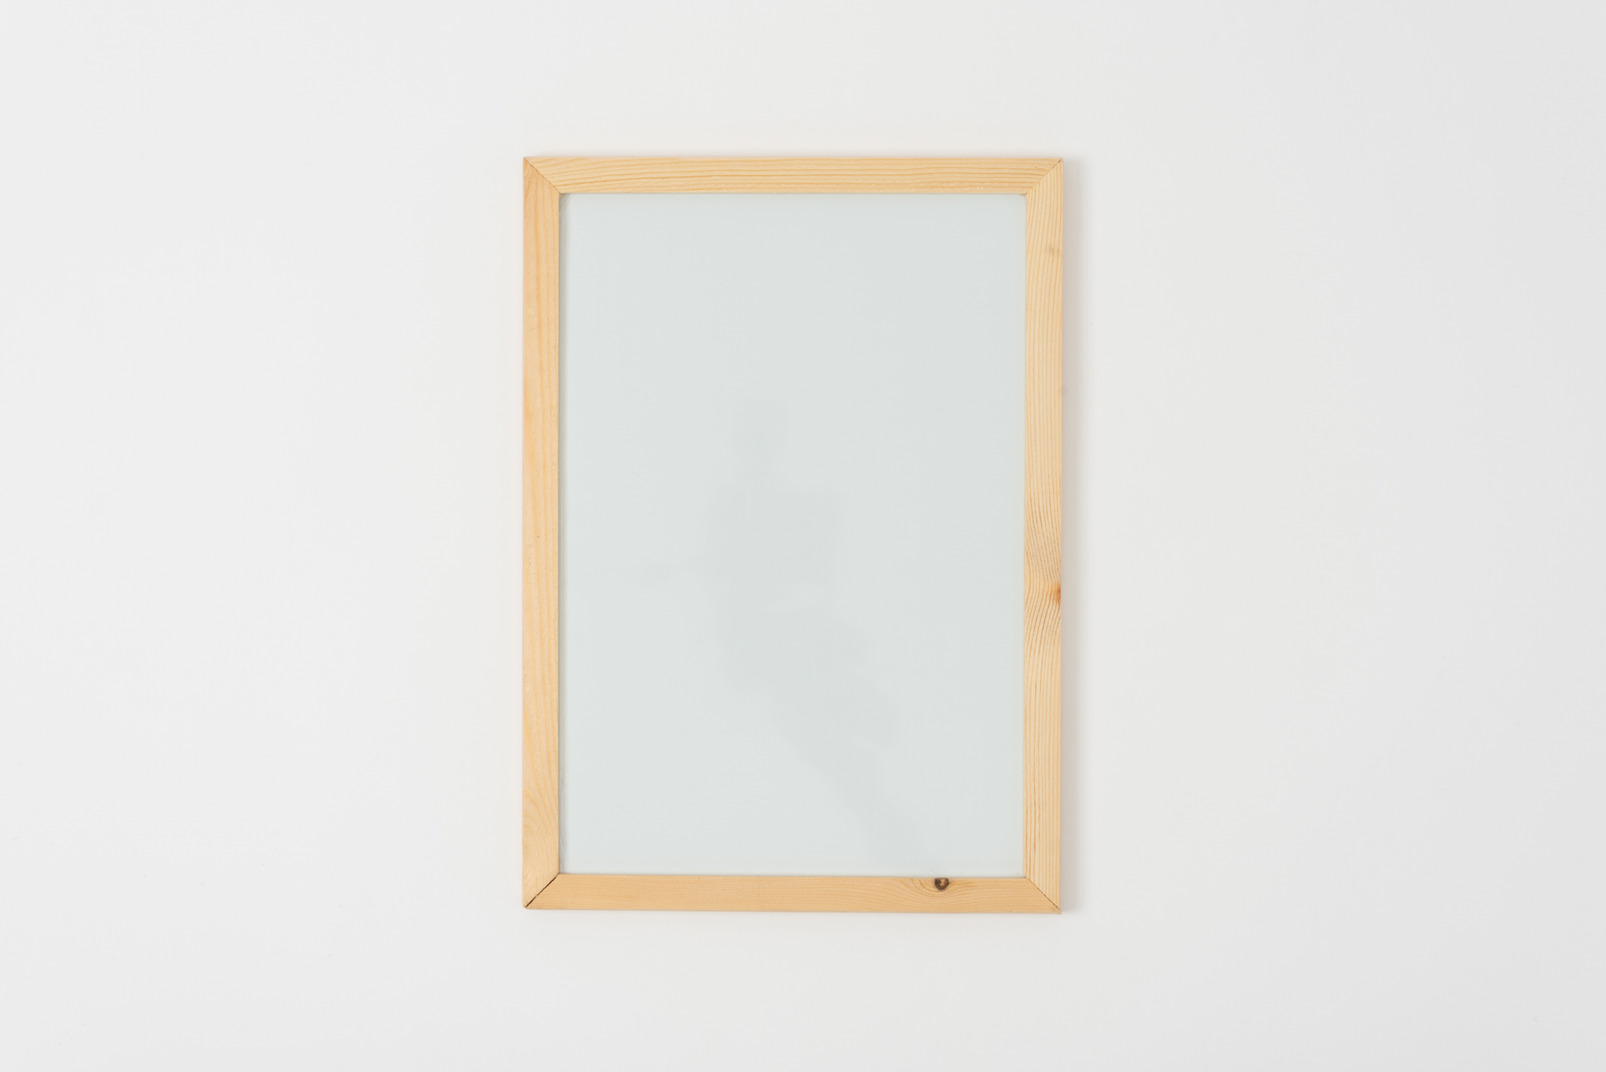 Wooden frame with a sheet of paper